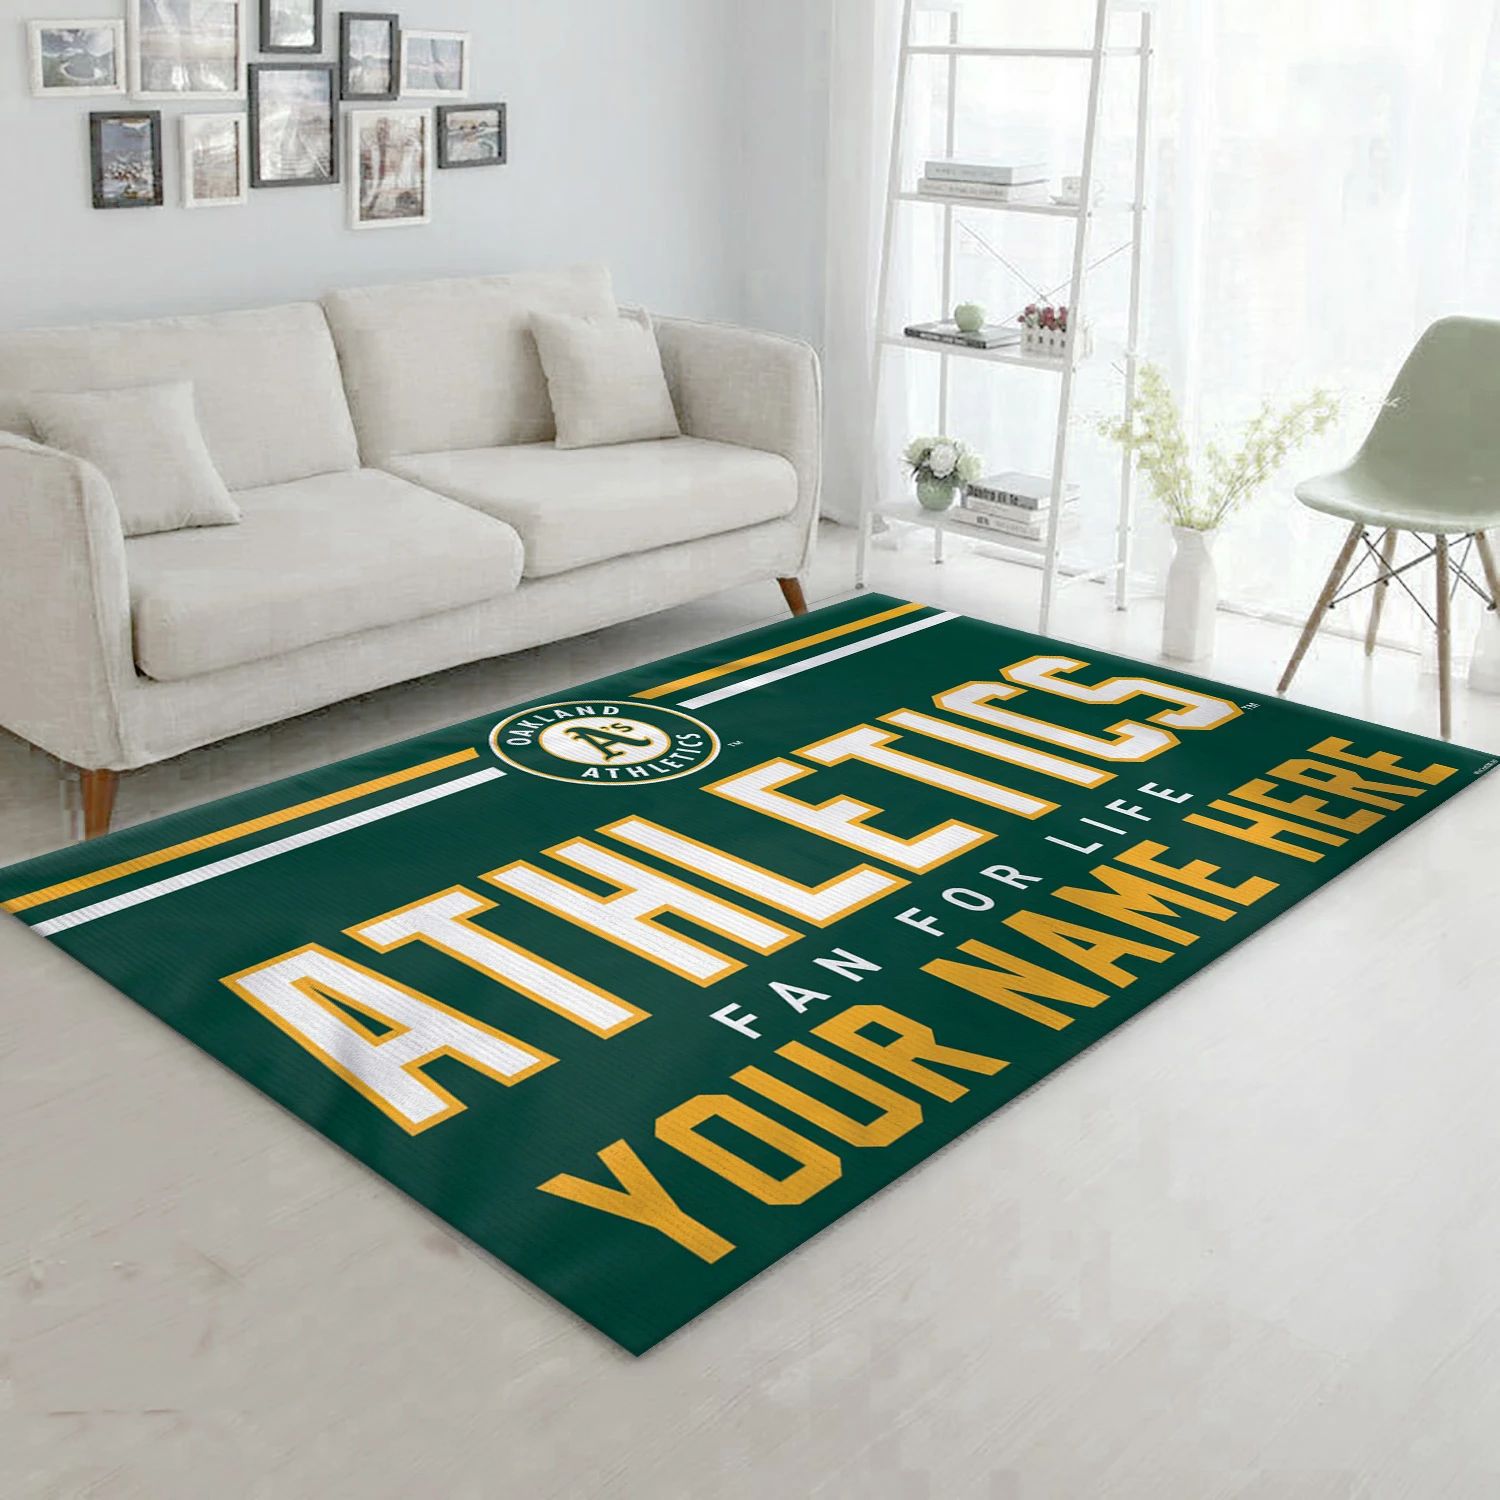 Oakland Athletics Personalized MLB Reangle Area Rug, Living Room Rug - Home Decor - Indoor Outdoor Rugs 1